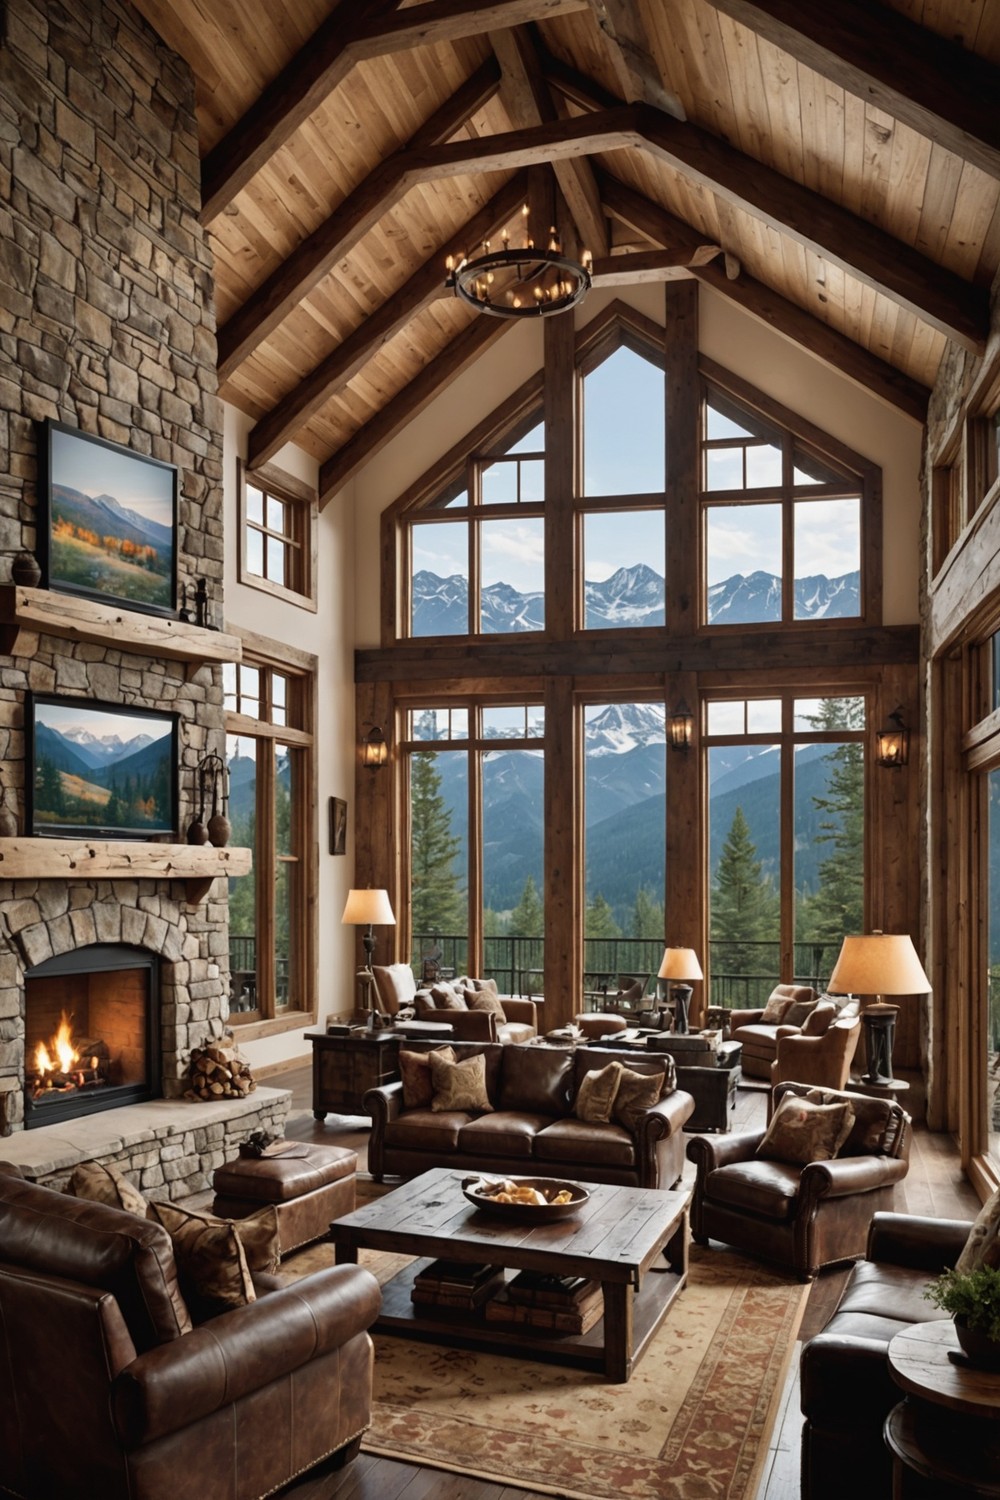 Floor-to-Ceiling Stone Walls and Fireplace Surrounds